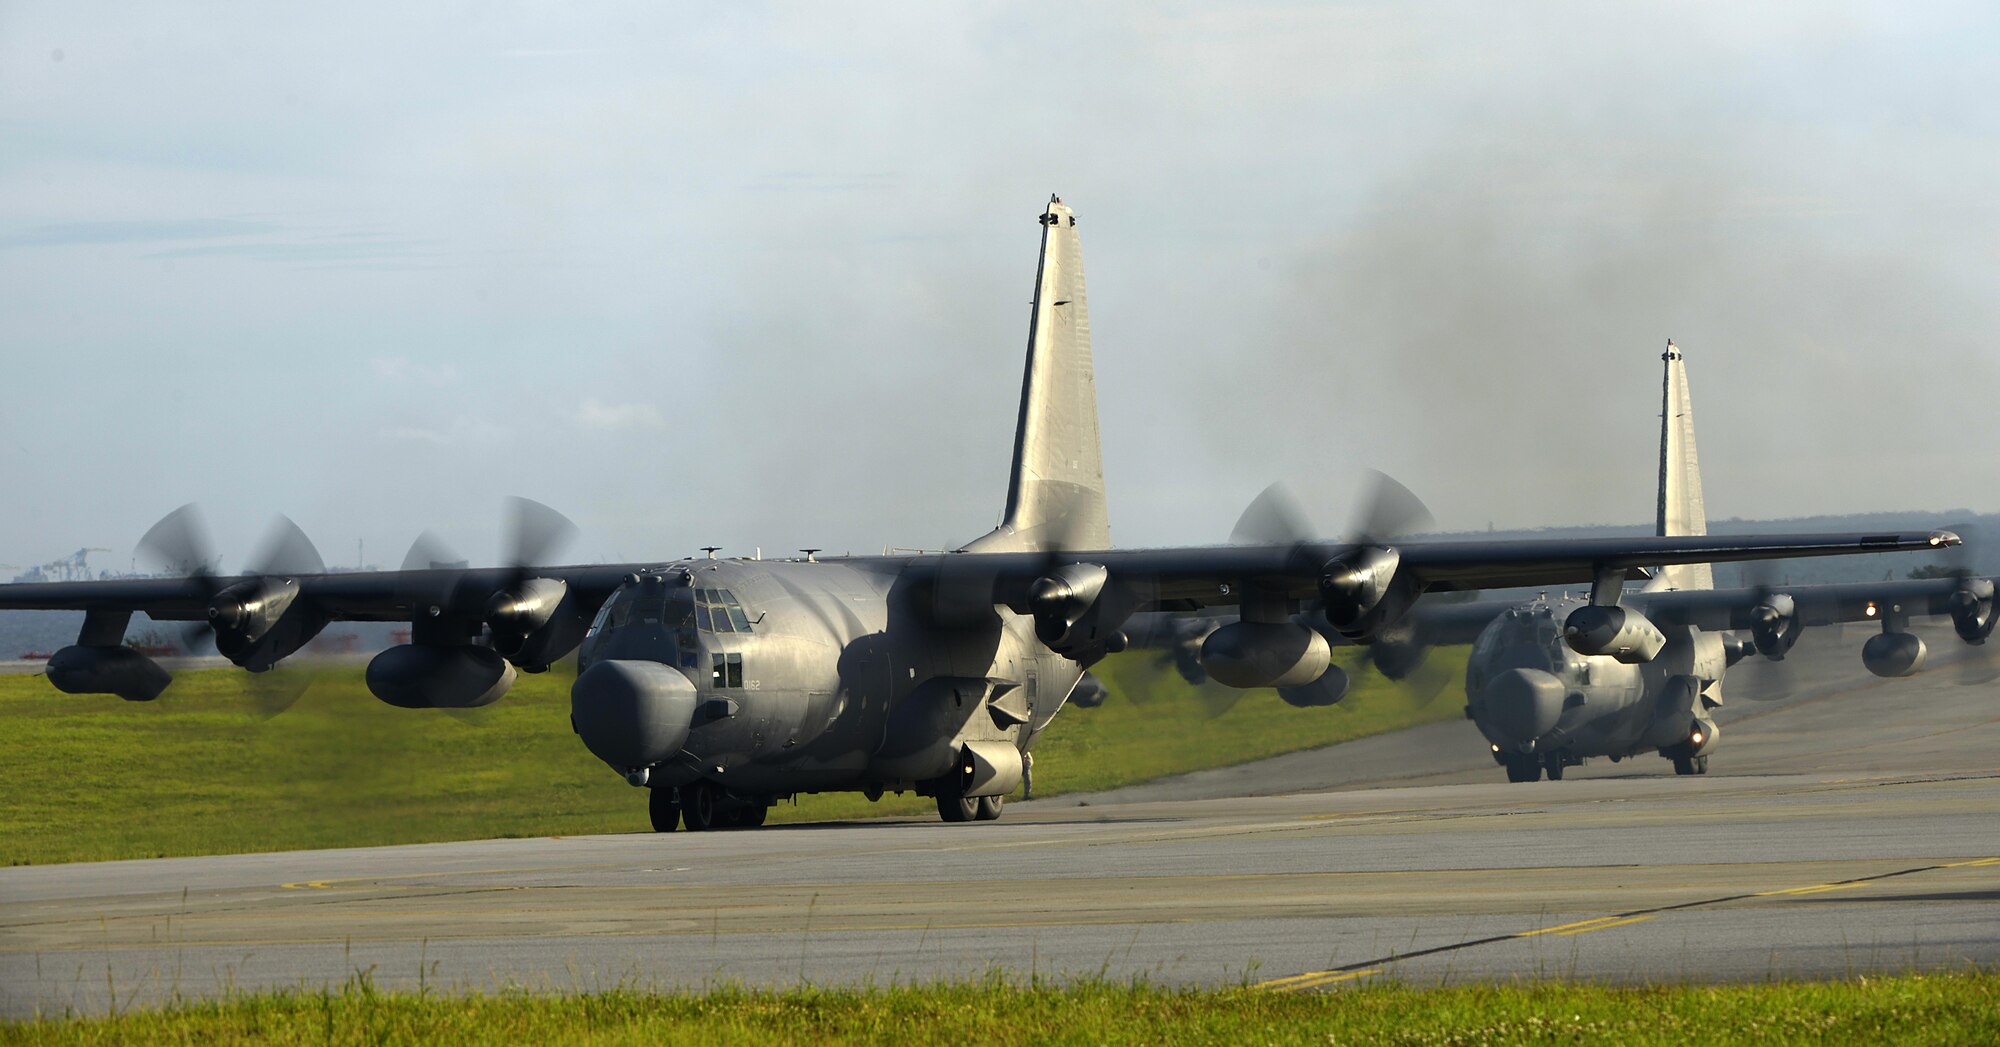 Two U.S. Air Force MC-130H Combat Talon IIs from the 1st Special Operations Squadron taxi in line on the Kadena Air Base, Japan, flightline May 14, 2015. The 1st Special Operations Squadron operates the MC-130H providing infiltration, exfiltration, and resupply of special operations forces and equipment in hostile or denied territory.  By conducting formation flight, aircrews and maintainers test and validate their ability to efficiently generate aircraft and to quickly infiltrate and exfiltrate large numbers of ground forces. (U.S. Air Force photo by Staff Sgt. Maeson L. Elleman)